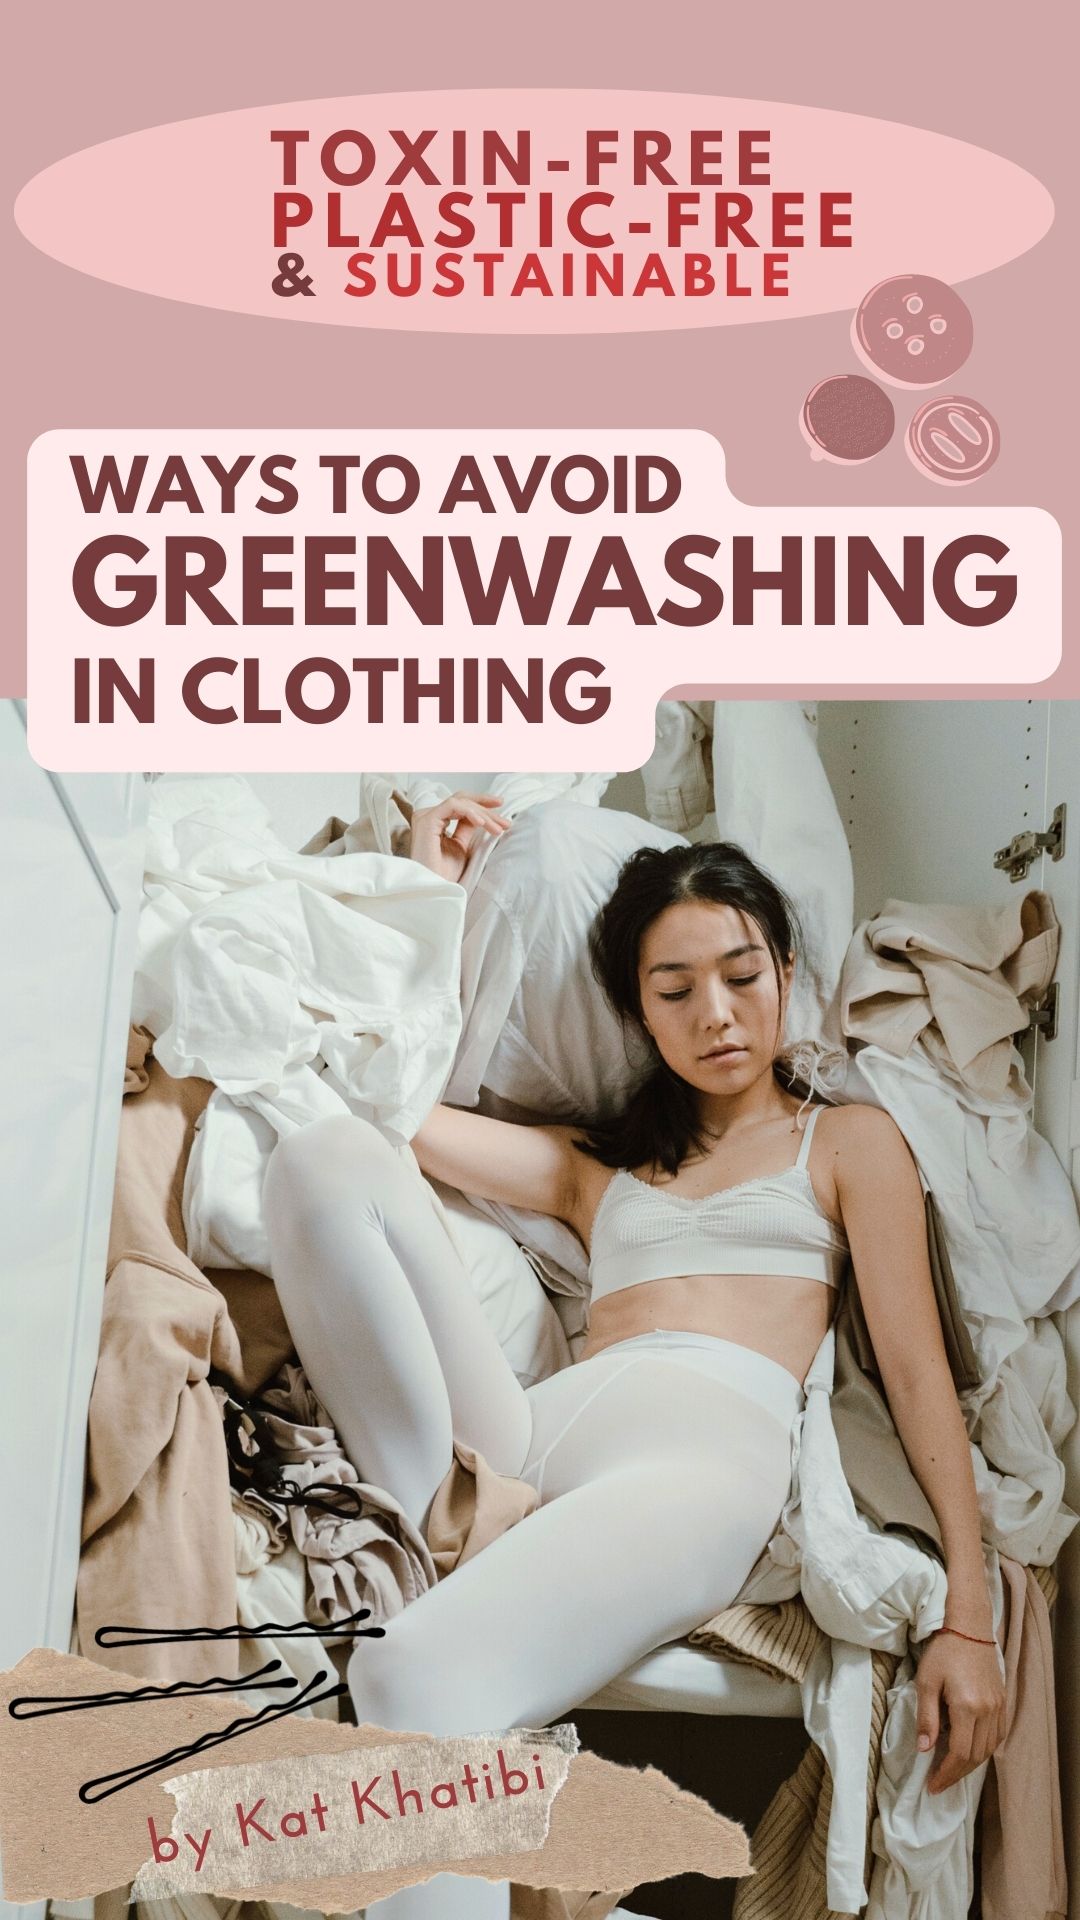 How To Find Safe Clothing to Avoid Endocrine Disruptors, Obesogens, Carcinogens, etc. if you Have PCOS or Hormonal Imbalances